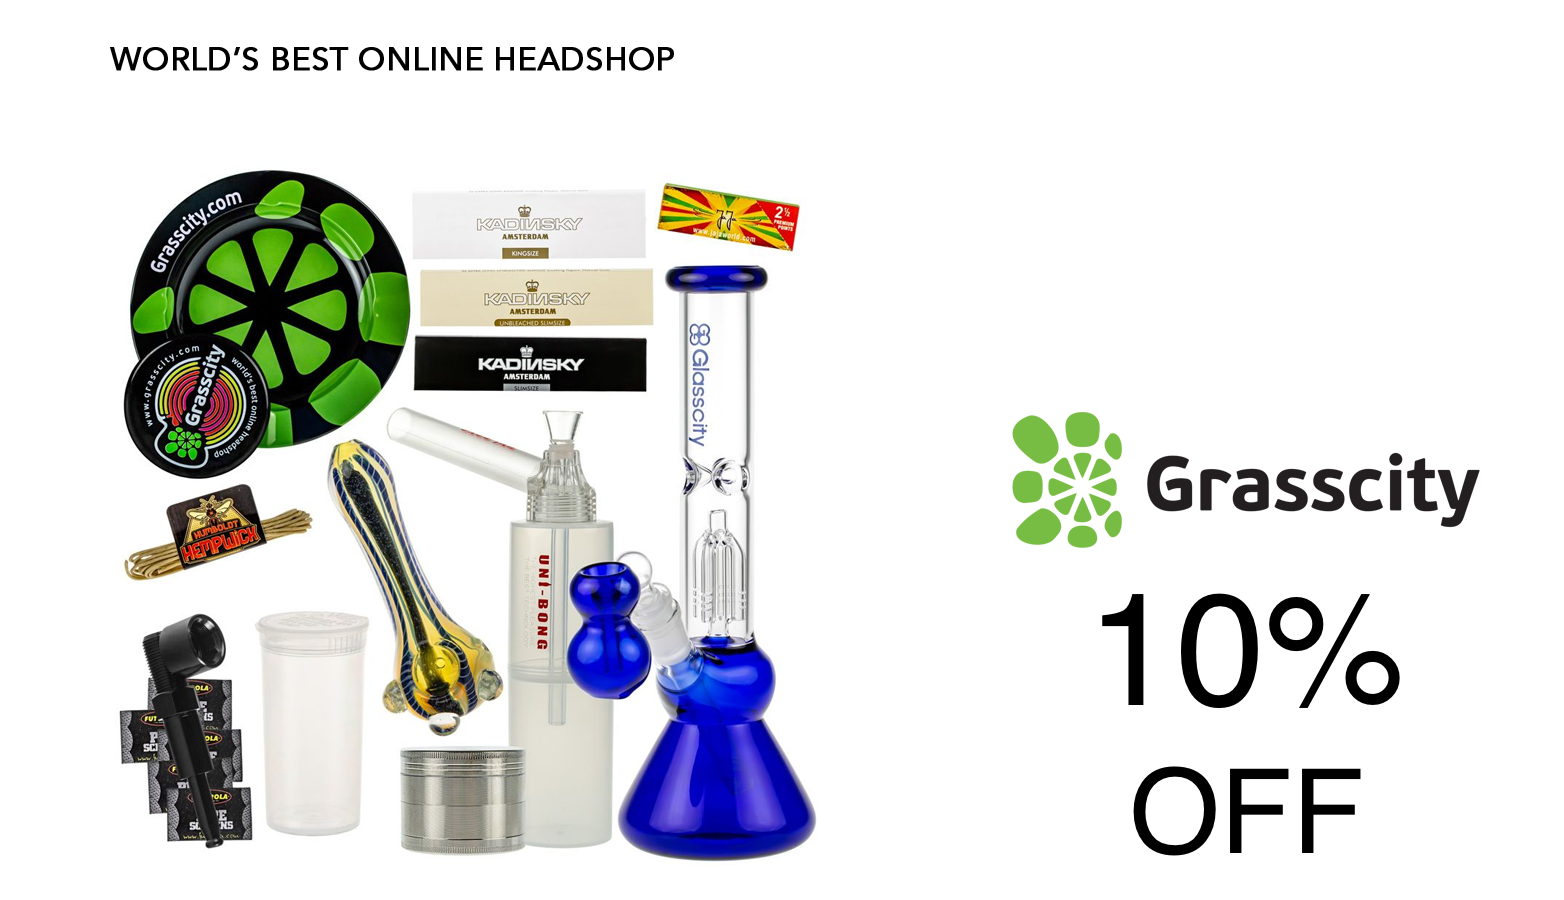 Grasscity Discount Code - 10 Percent Coupon - Save On Cannabis